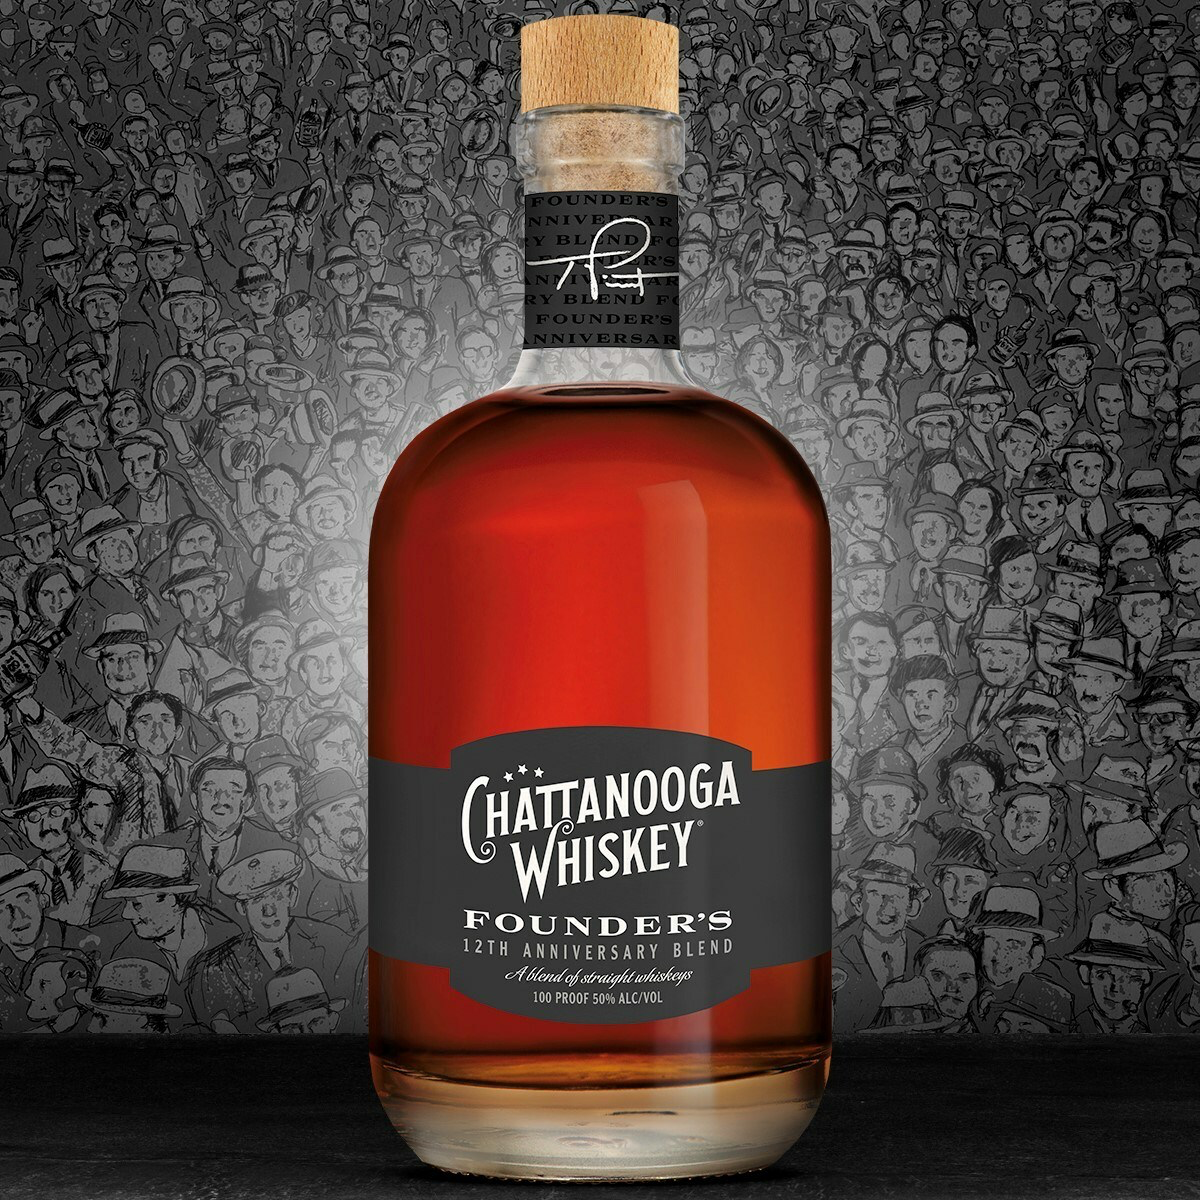 Chattanooga Whiskey New Founder’s Blend Celebrates its 12th Anniversary